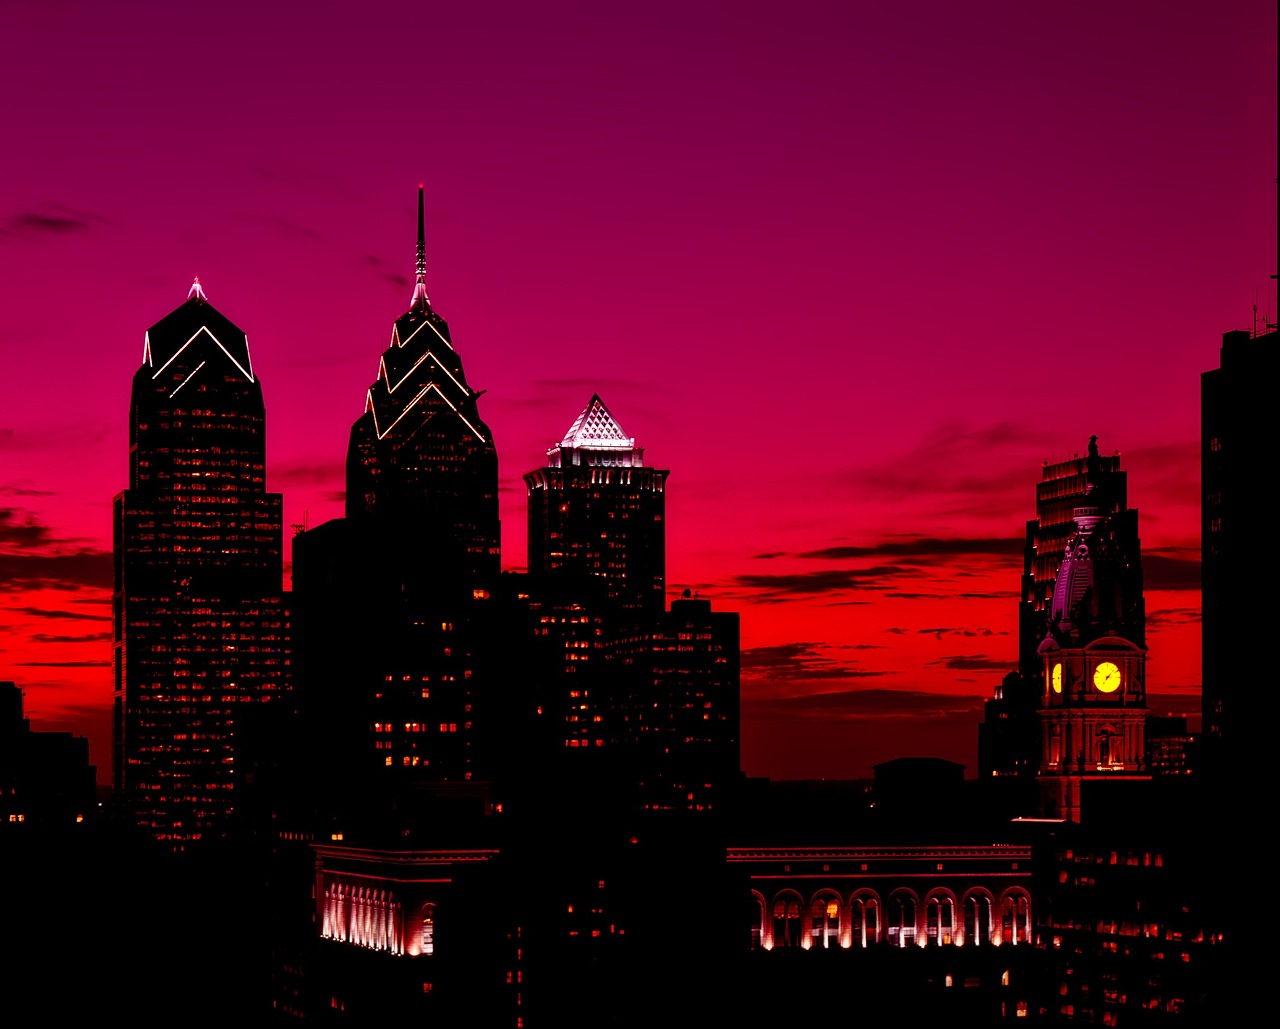 Historical Landmarks and Culinary Delights in Philadelphia